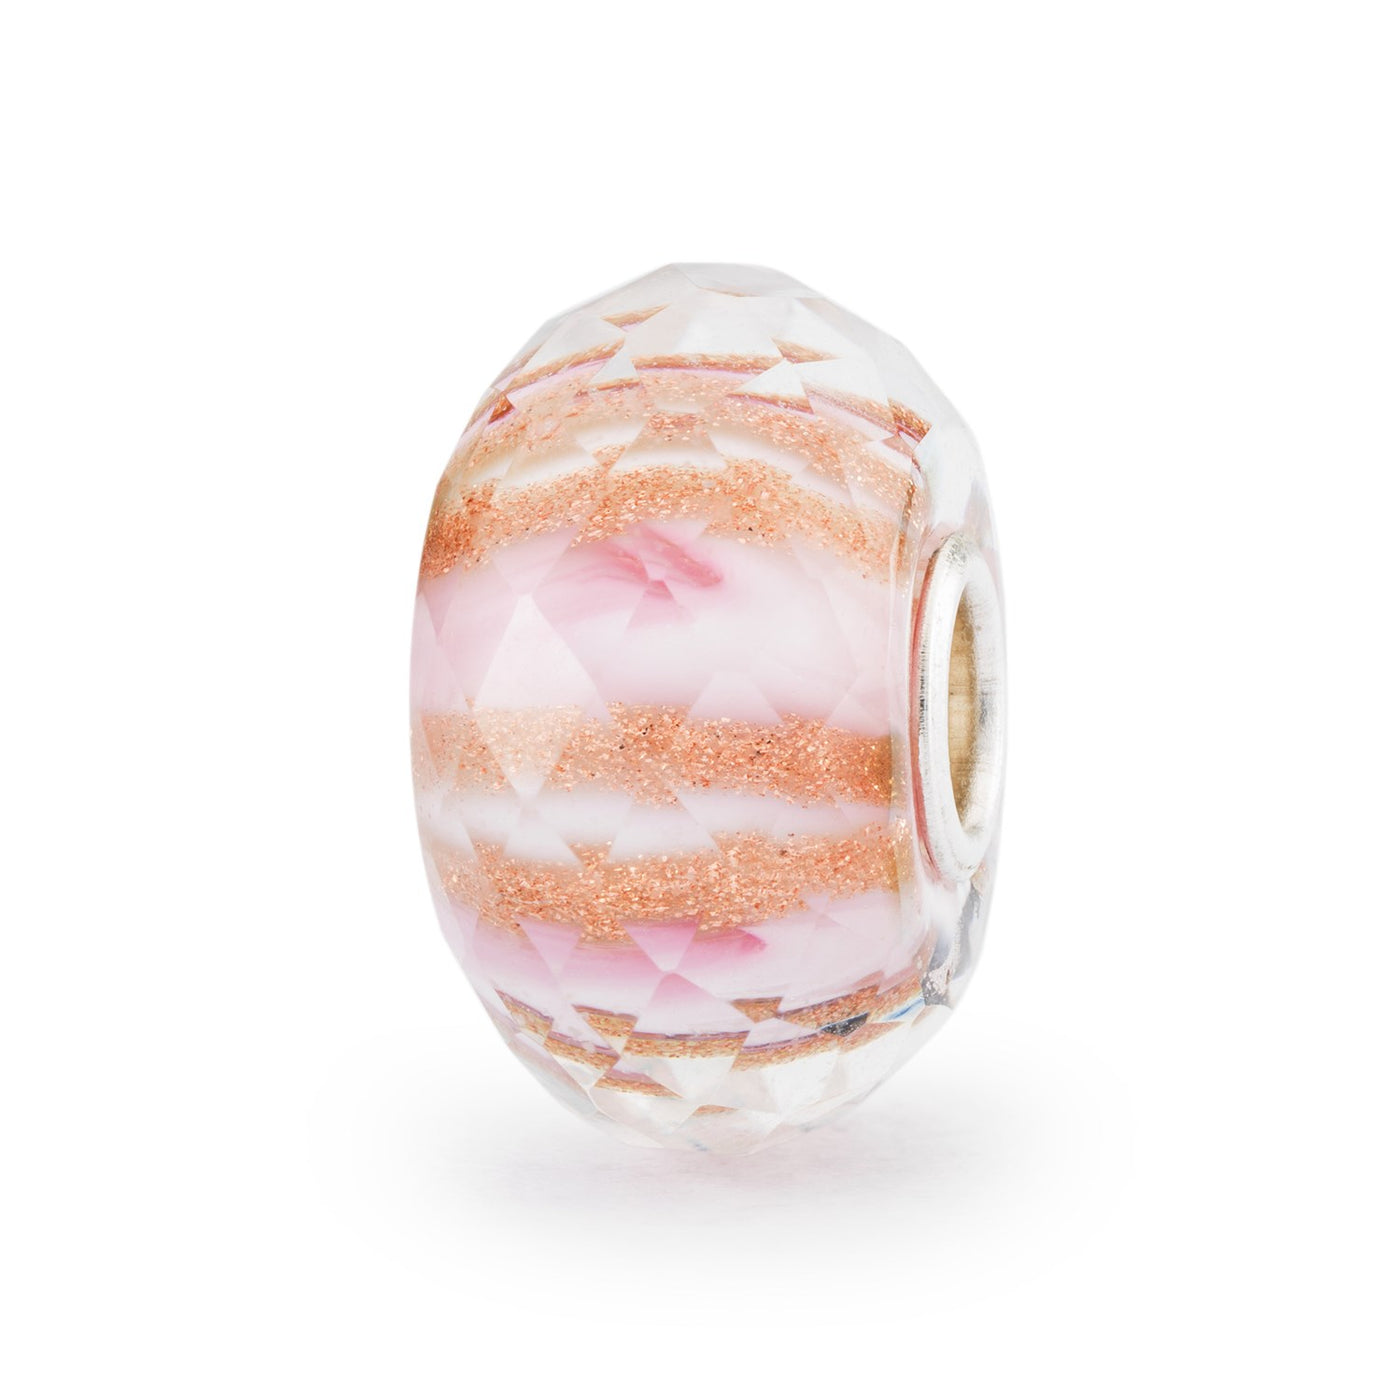 A lovely faceted glass bead with a soft pink hue and gold glimmer patterns.